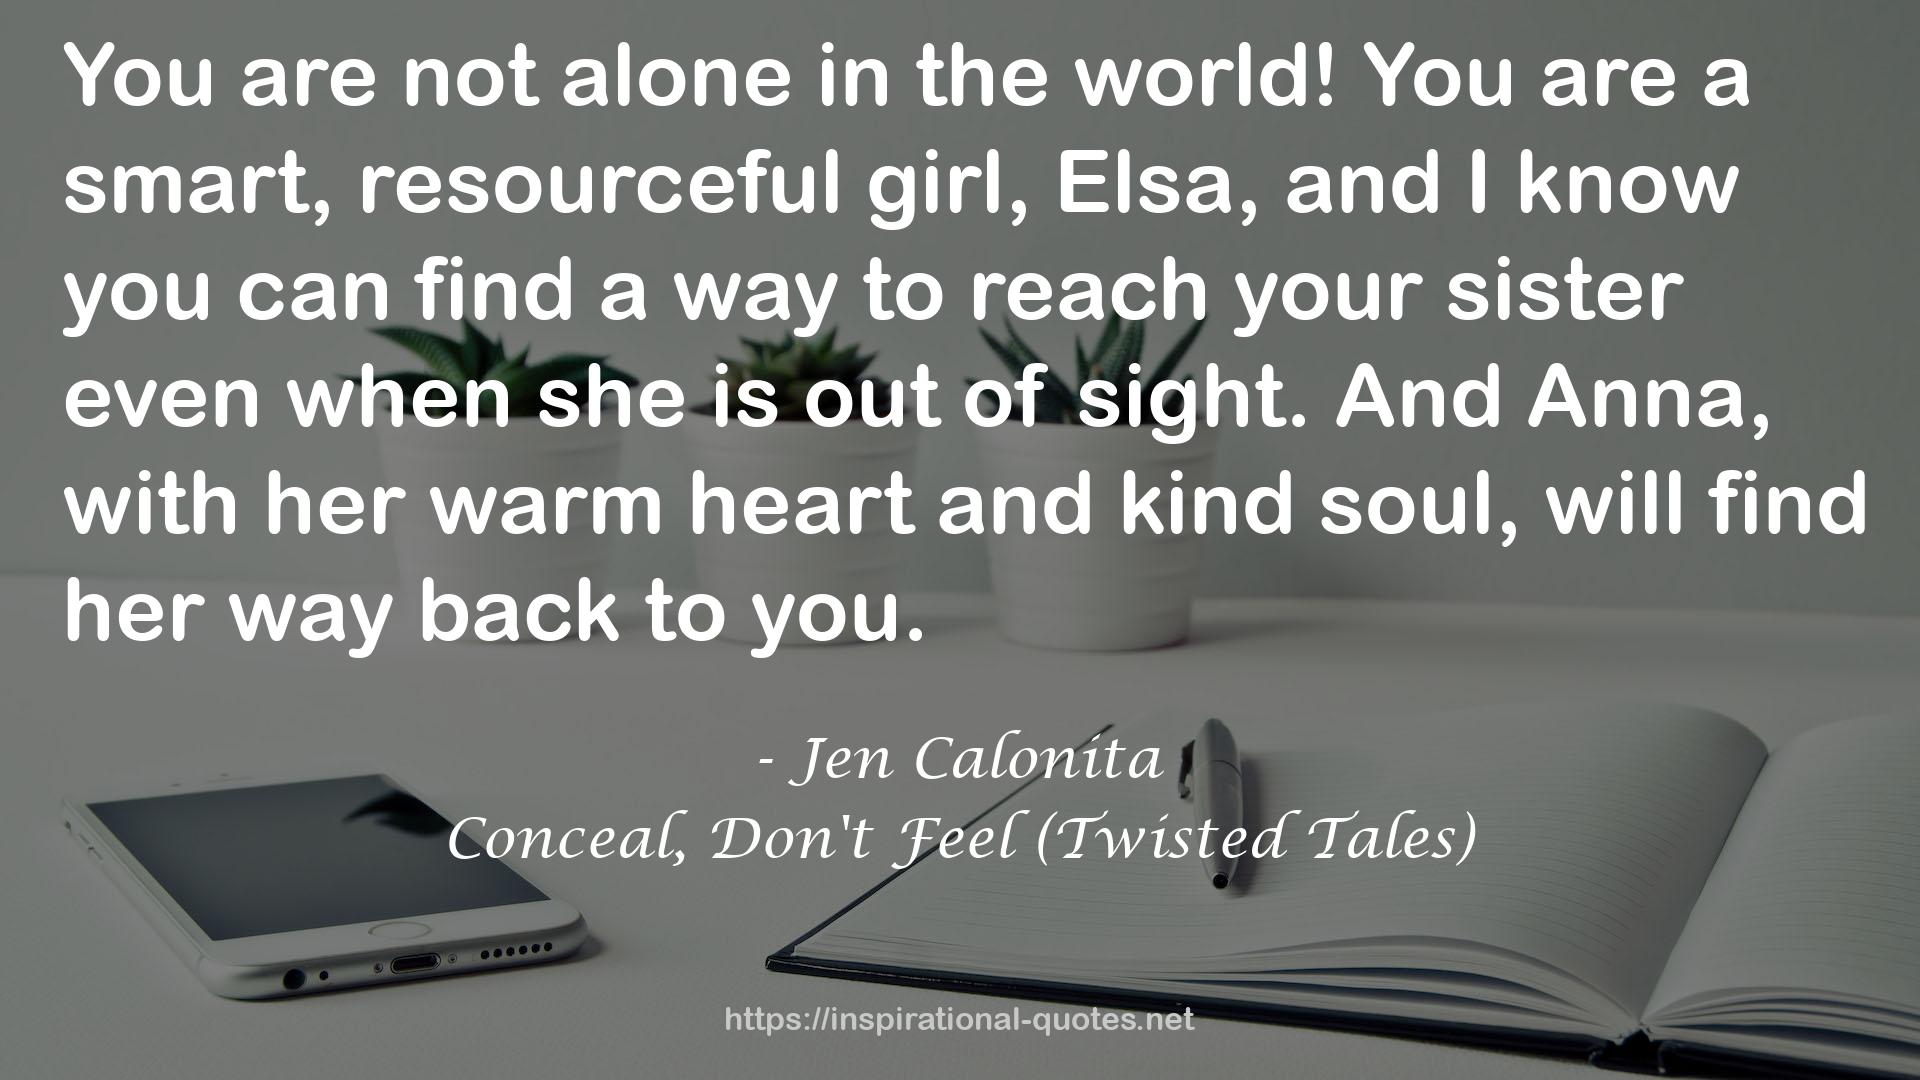 Conceal, Don't Feel (Twisted Tales) QUOTES